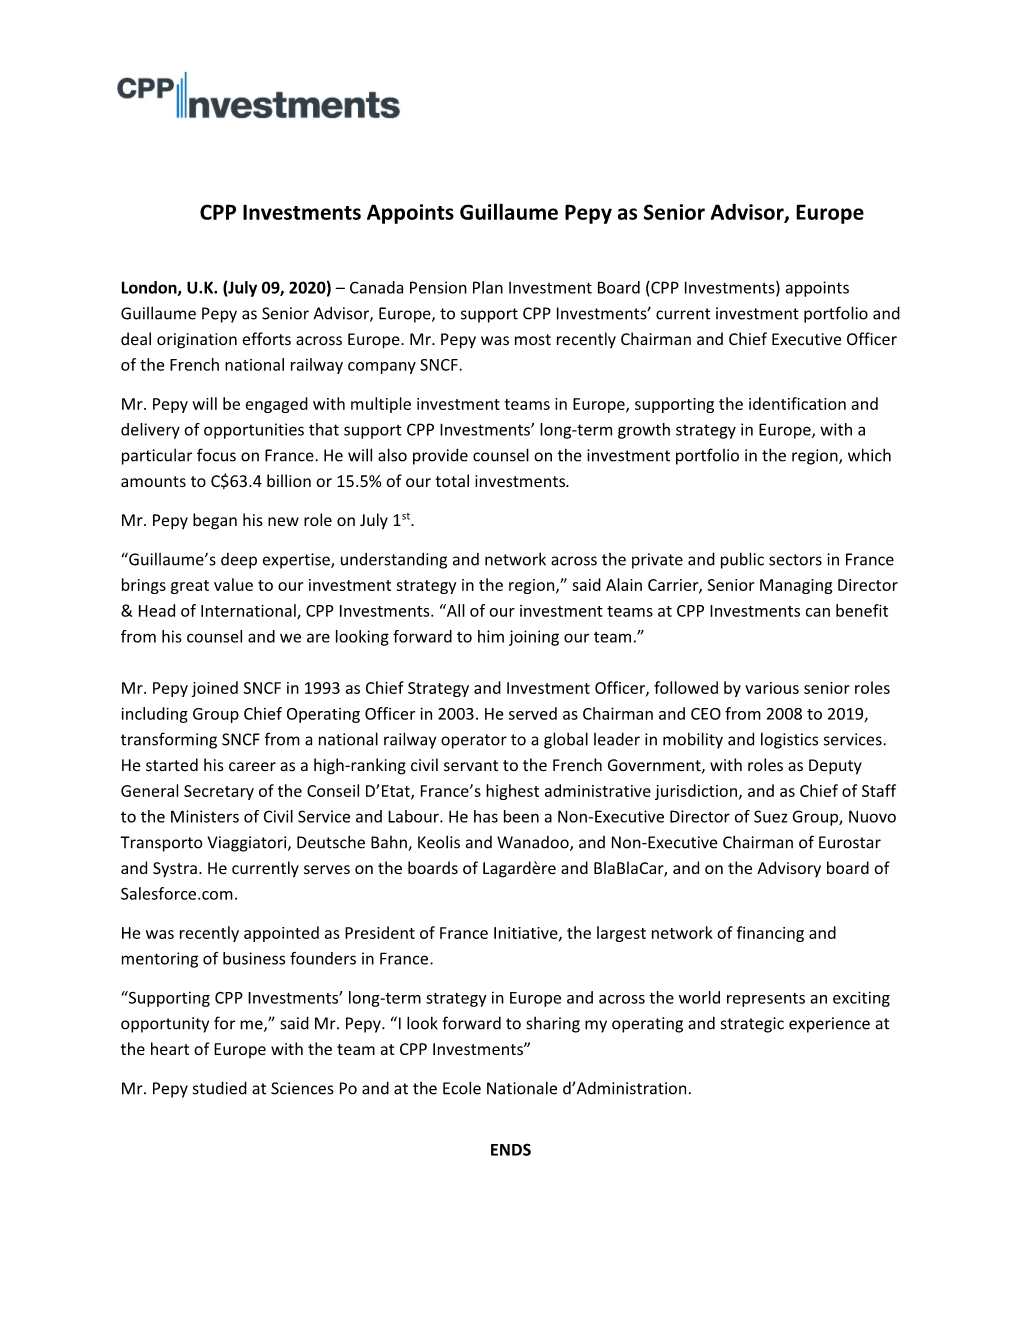 CPP Investments Appoints Guillaume Pepy As Senior Advisor, Europe